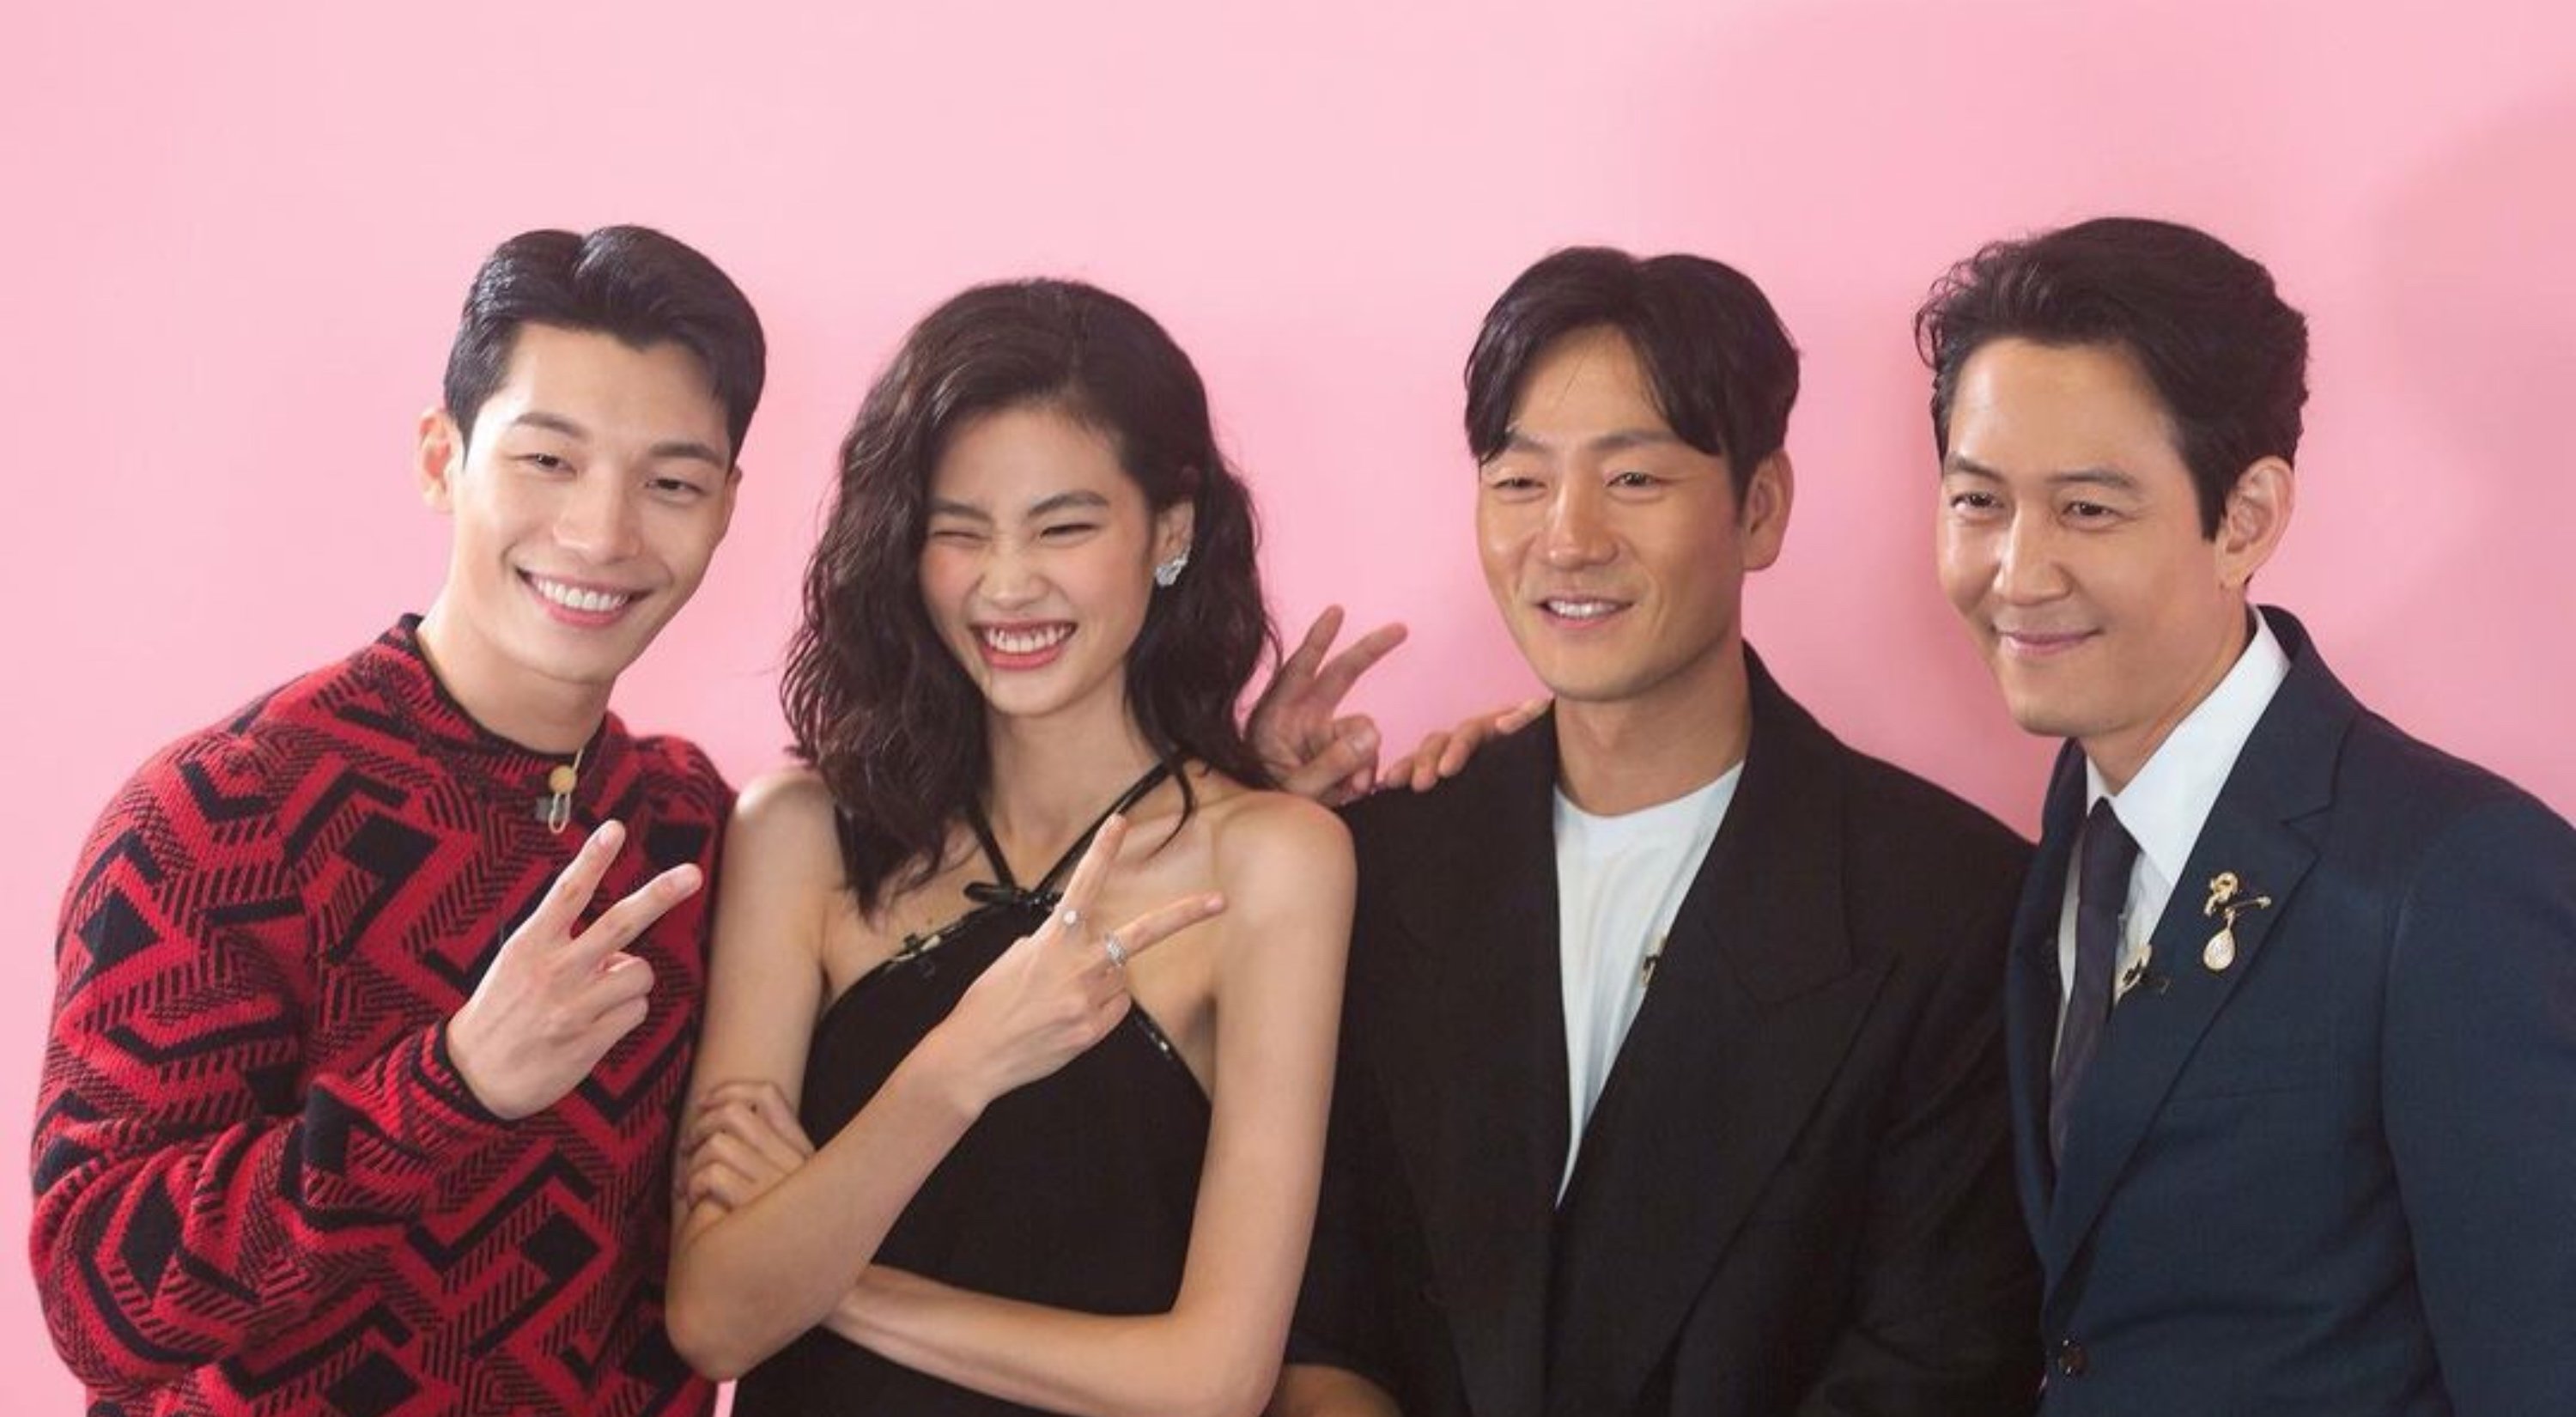 Wi Ha-Joon, HoYeon Jung, Park Hae-Soo and Lee Jung-Jae for 'Squid Game' Netflix K-drama wearing suits and red sweater